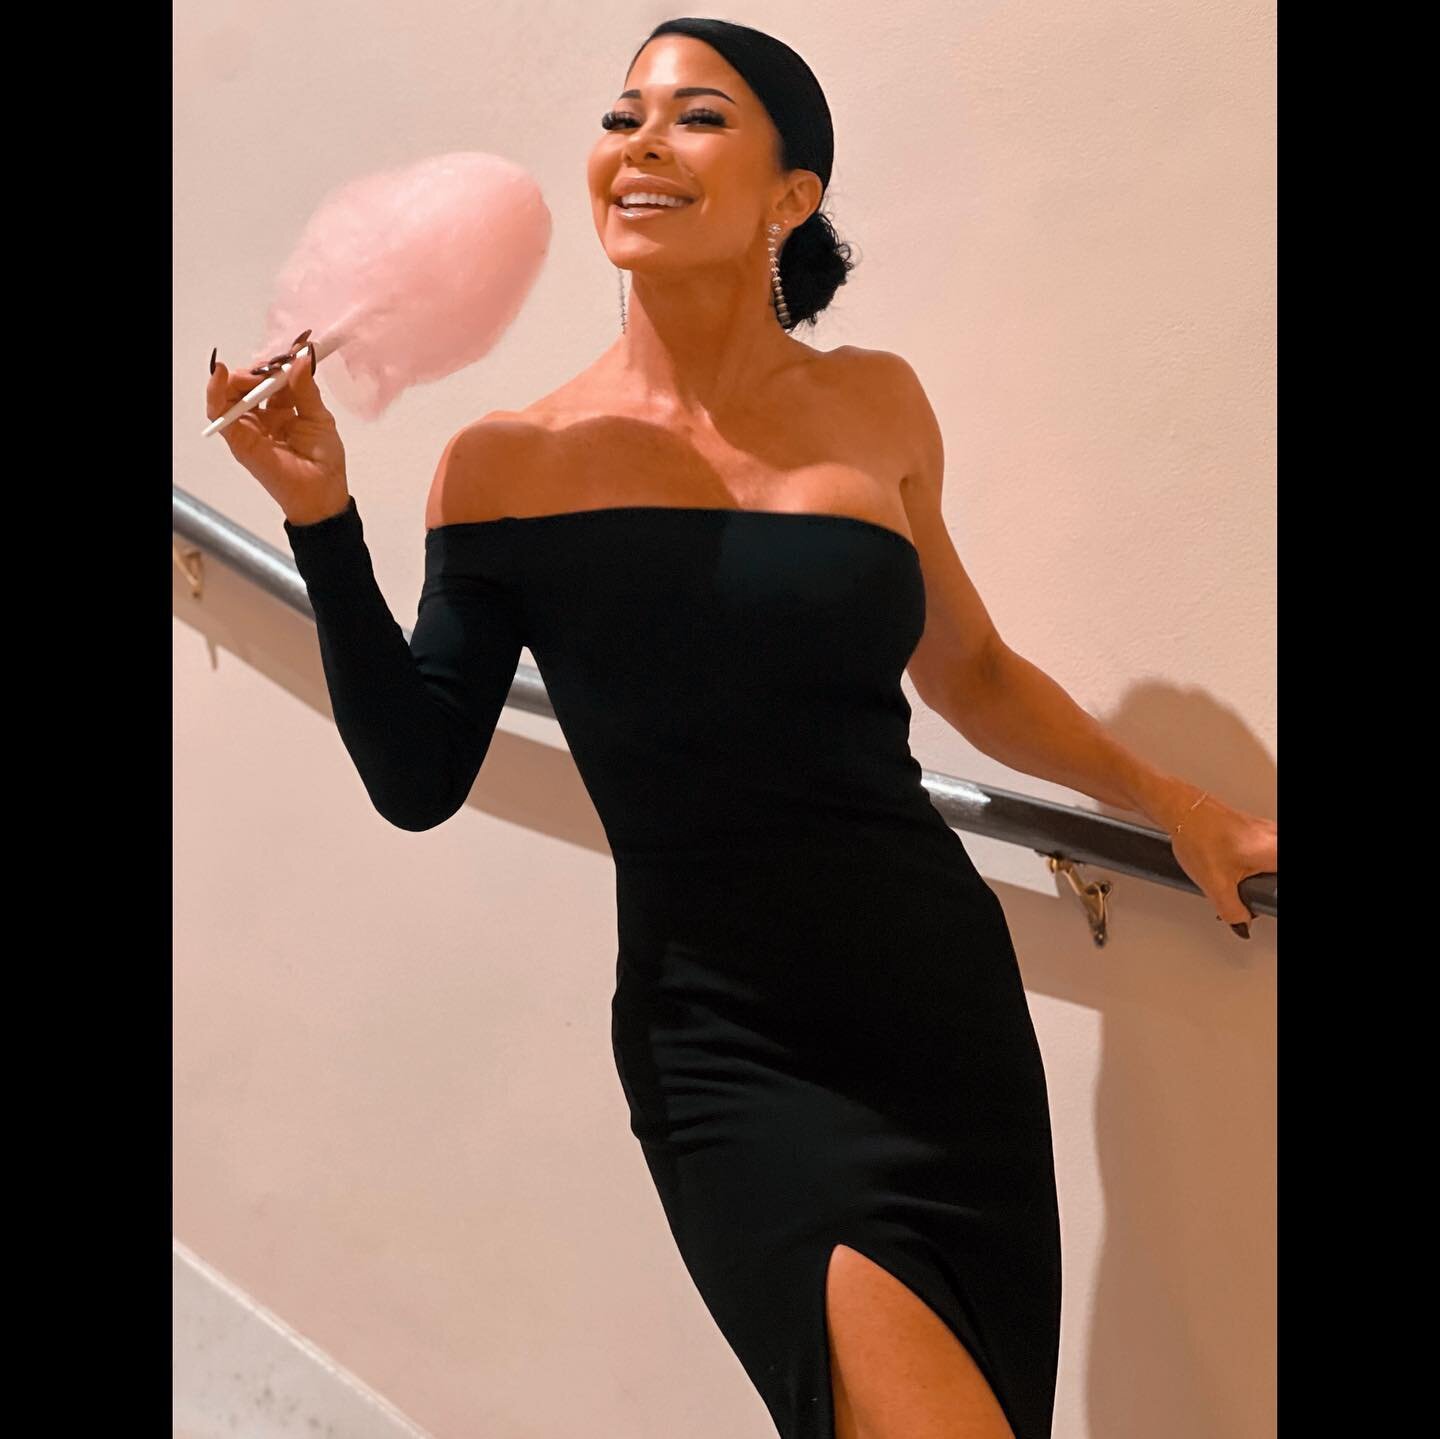 Went to a black tie wedding tonight 💒. Dropped my champagne glass 🥂 . It shattered all over the floor. Someone yelled, &ldquo;MAZEL TOV!&rdquo; so I went and ate cotton candy on a staircase. #welcometomylife